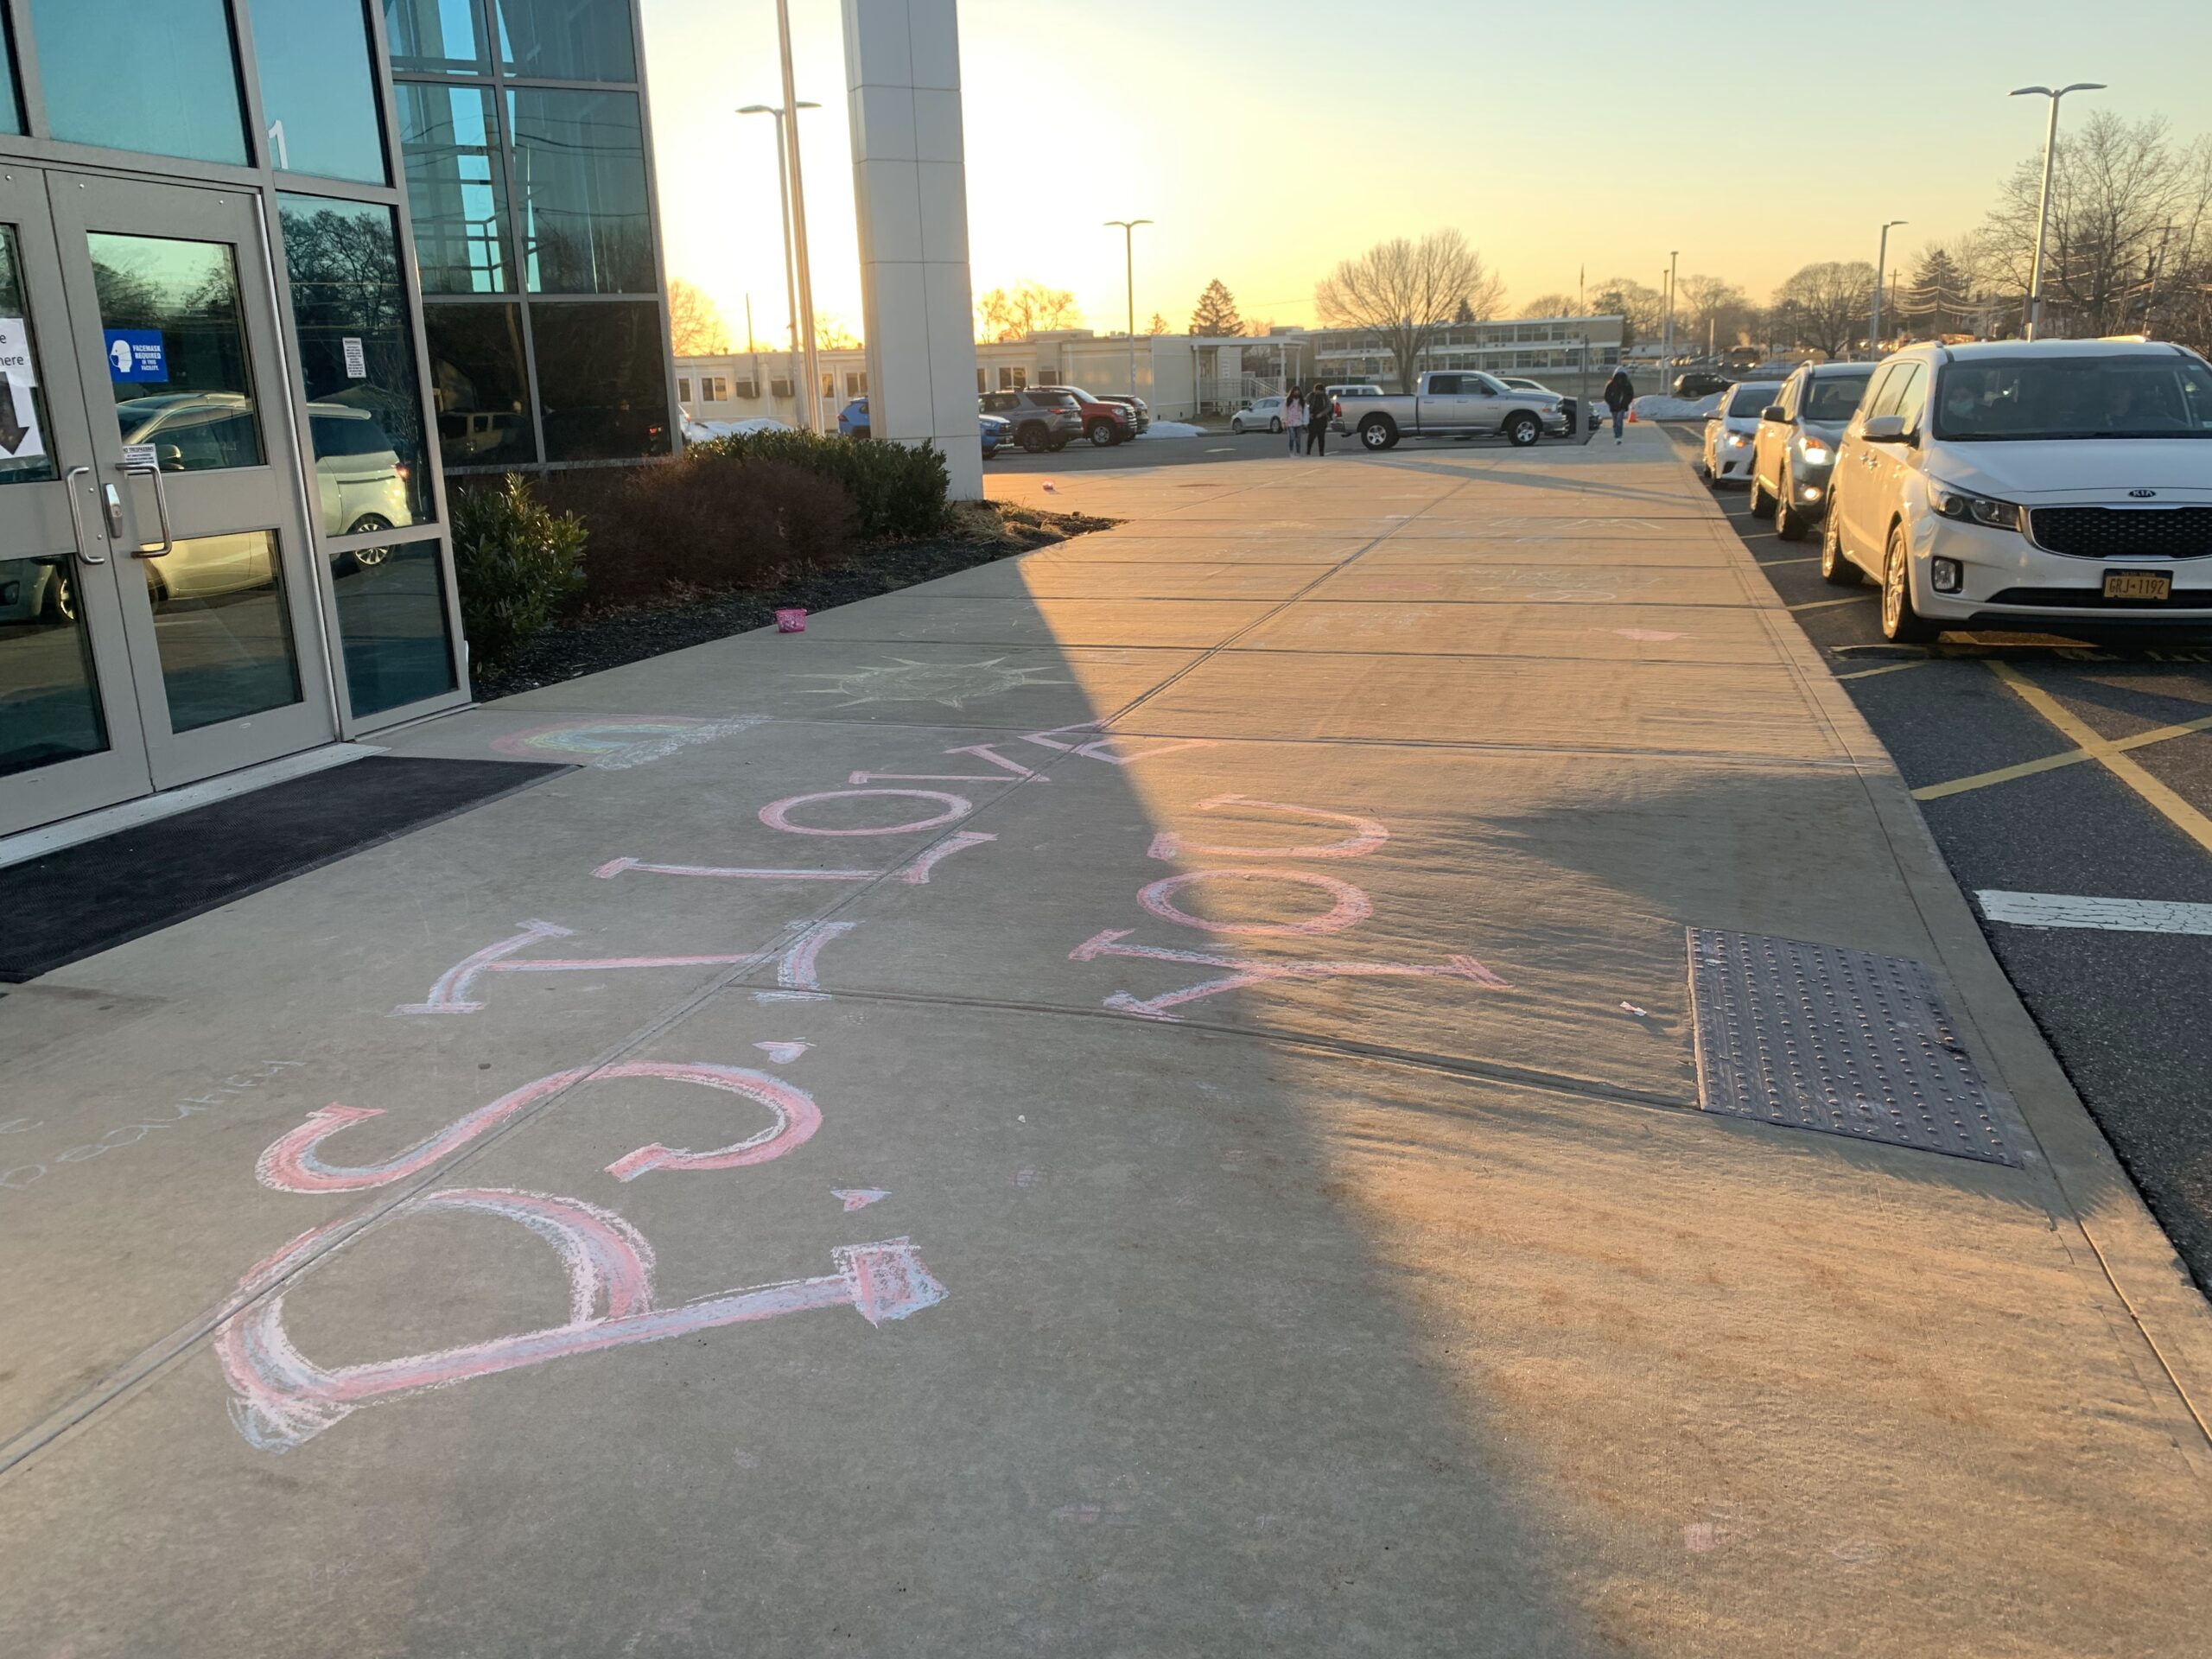 A message from Riverhead High School students. COURTESY JENNIFER BOESE, RIVERHEAD HIGH SCHOOL